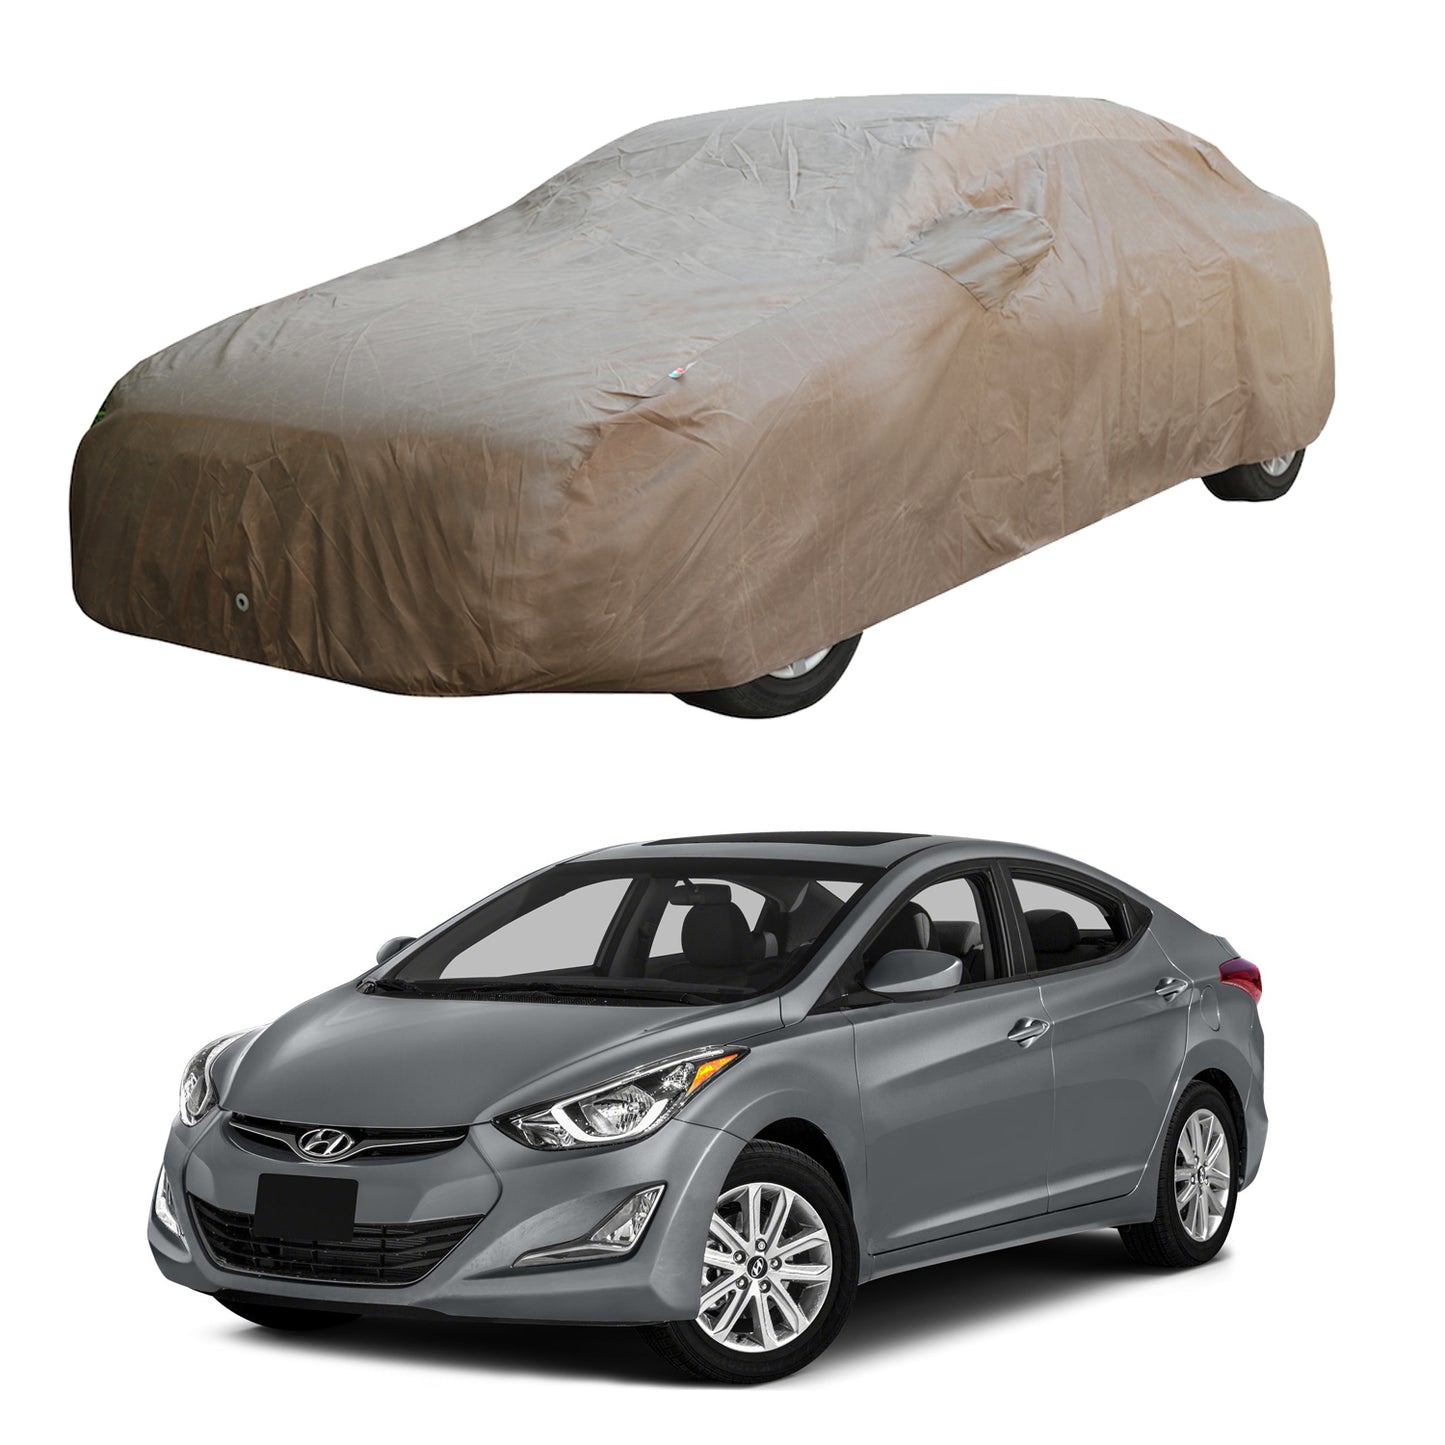 Oshotto Brown 100% Waterproof Car Body Cover with Mirror Pockets For Hyundai Elantra